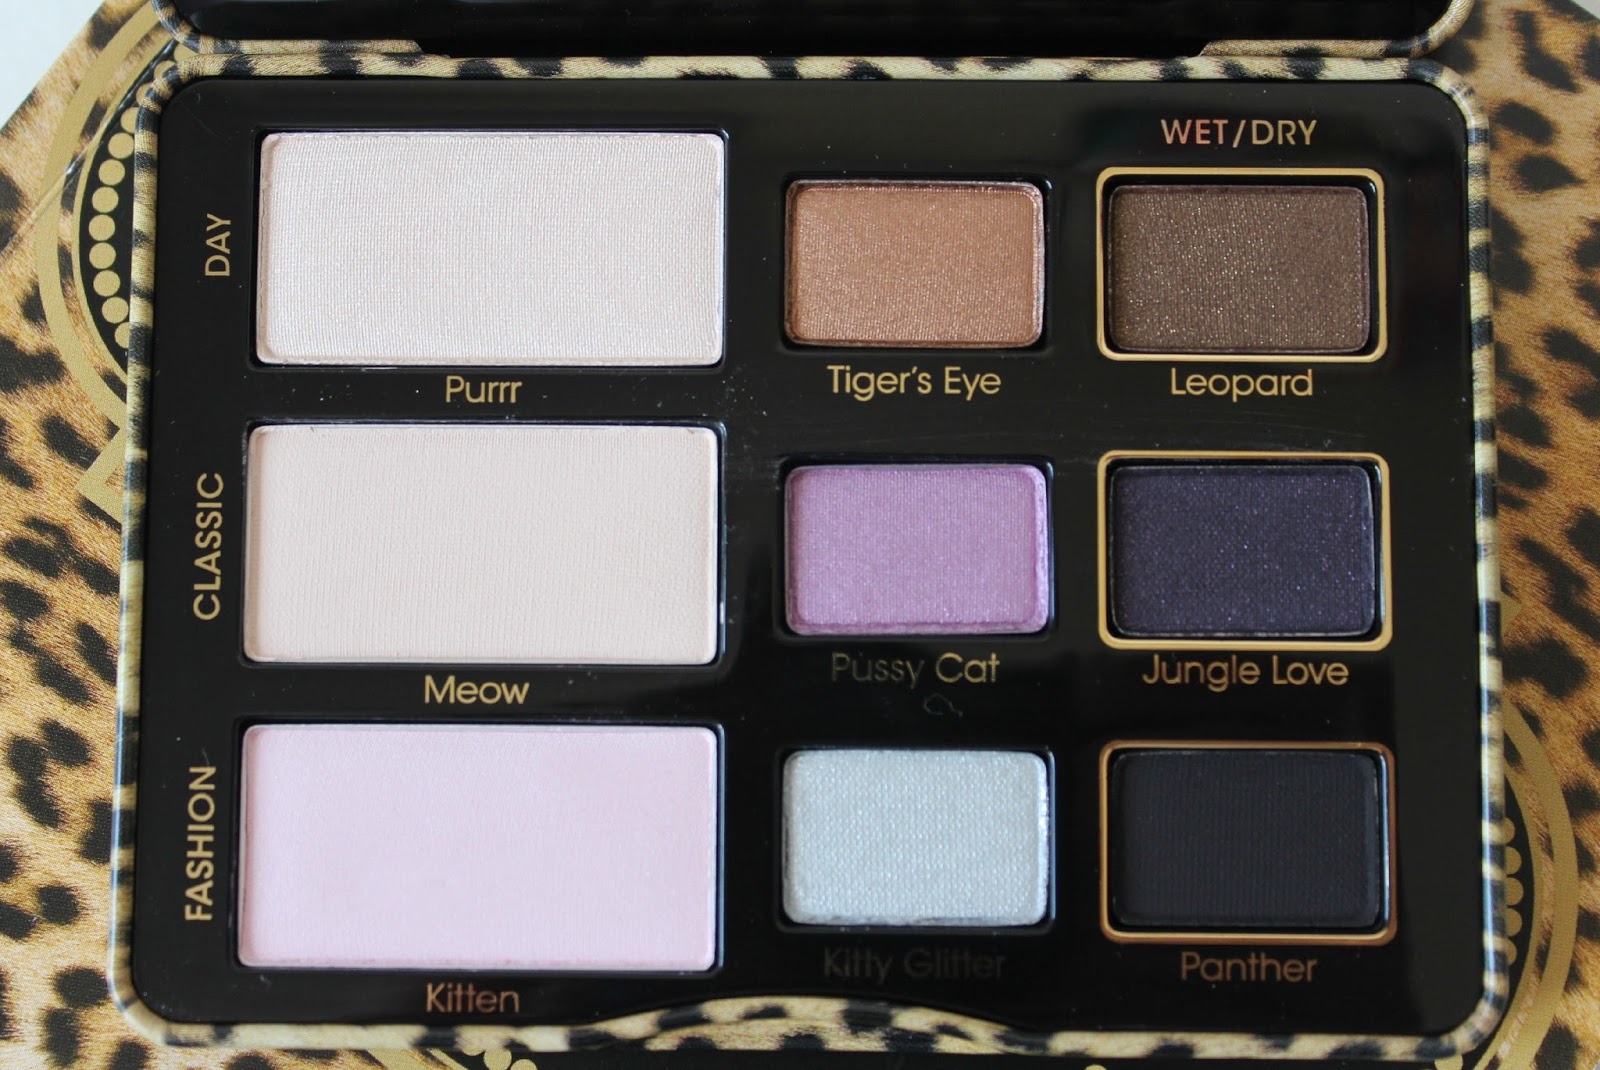 A picture of Too Faced Cat Eyes Palette